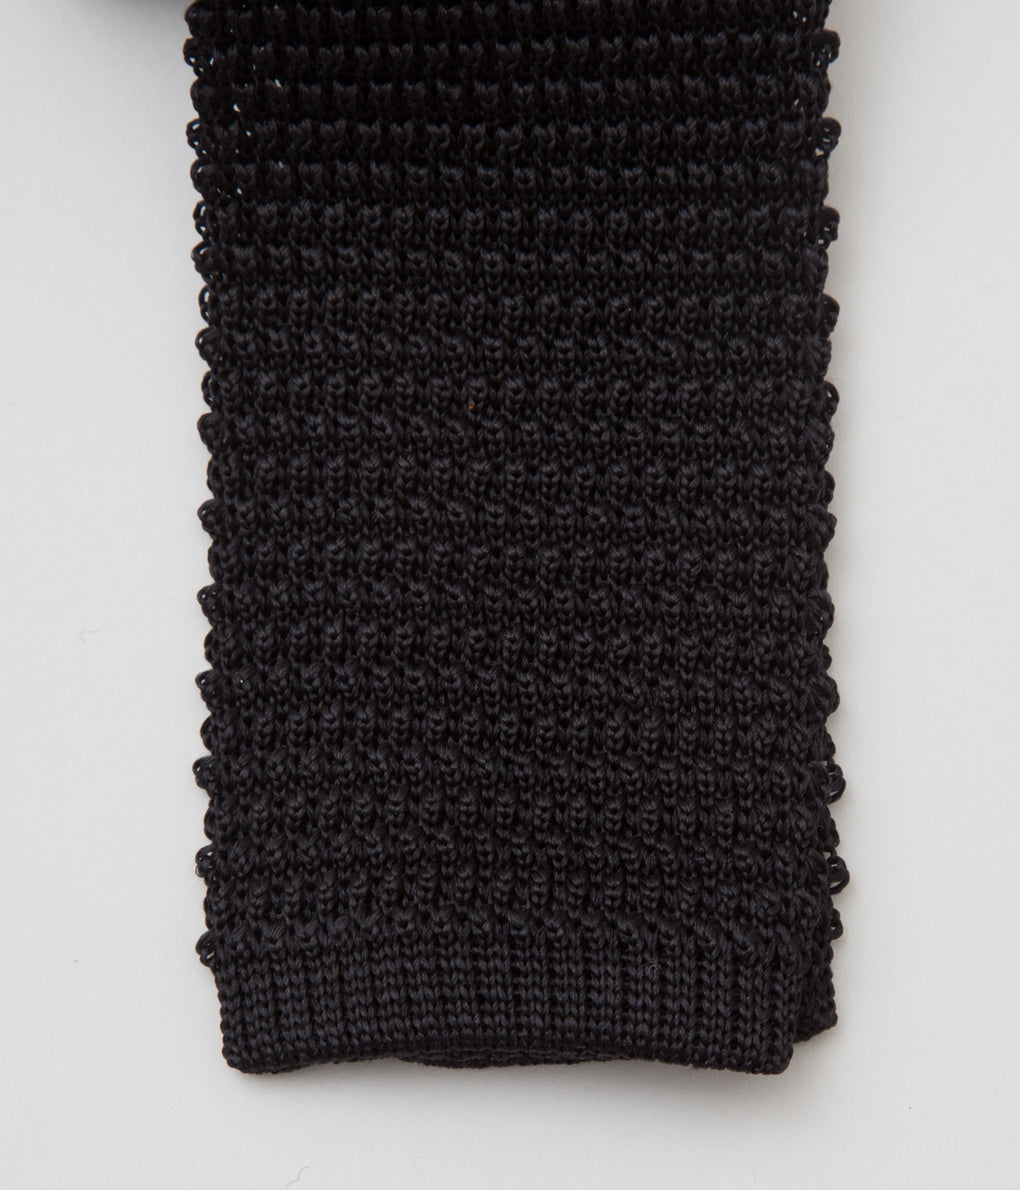 INDIVIDUALIZED ACCESSORIES "KNIT TIE" (BLACK)